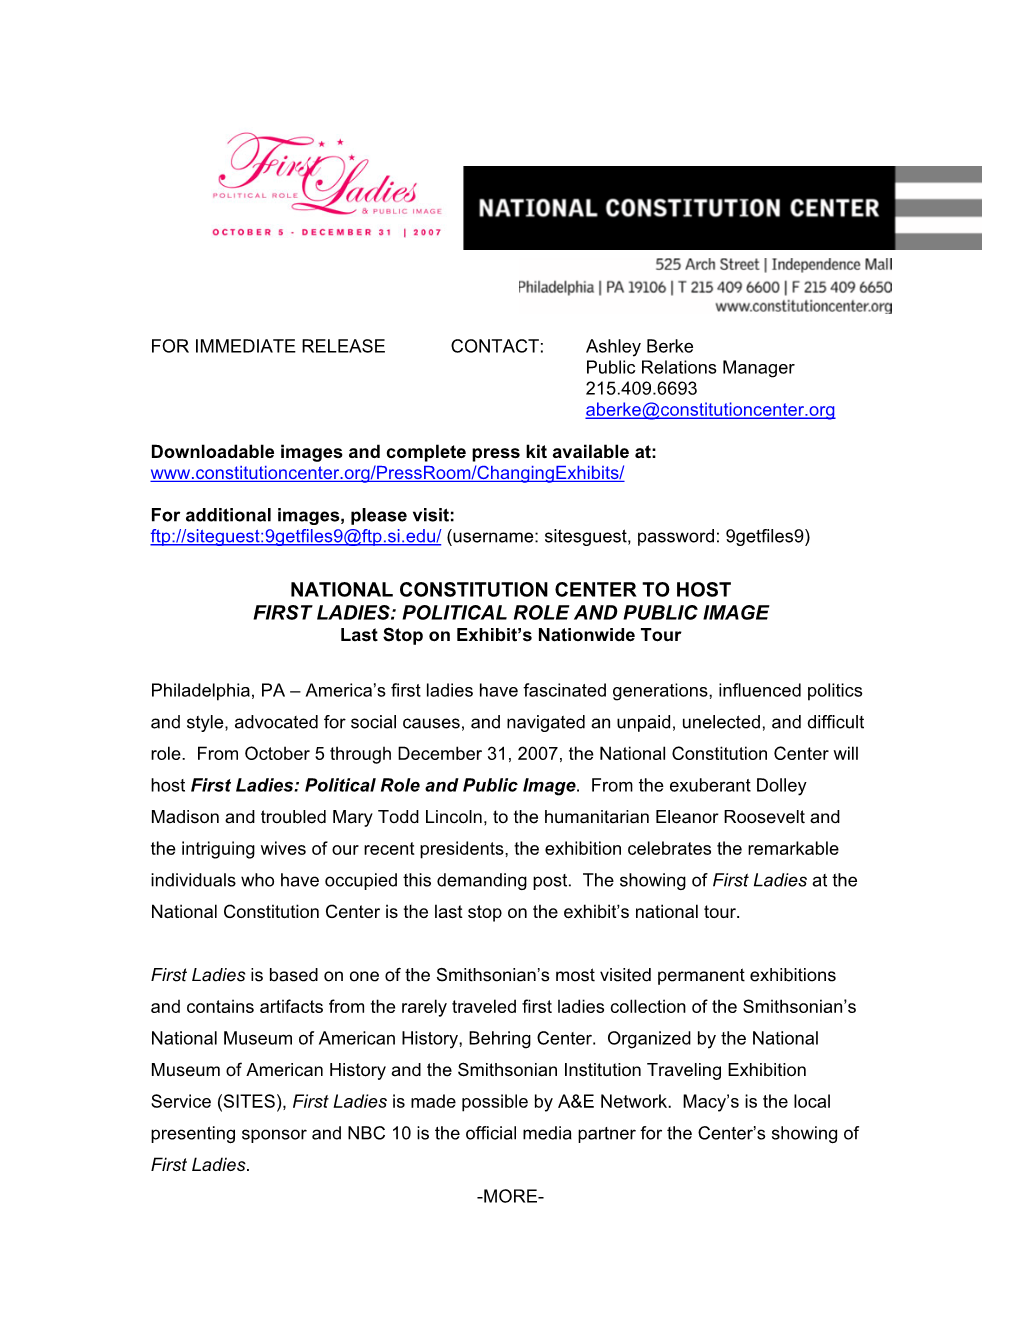 NATIONAL CONSTITUTION CENTER to HOST FIRST LADIES: POLITICAL ROLE and PUBLIC IMAGE Last Stop on Exhibit’S Nationwide Tour